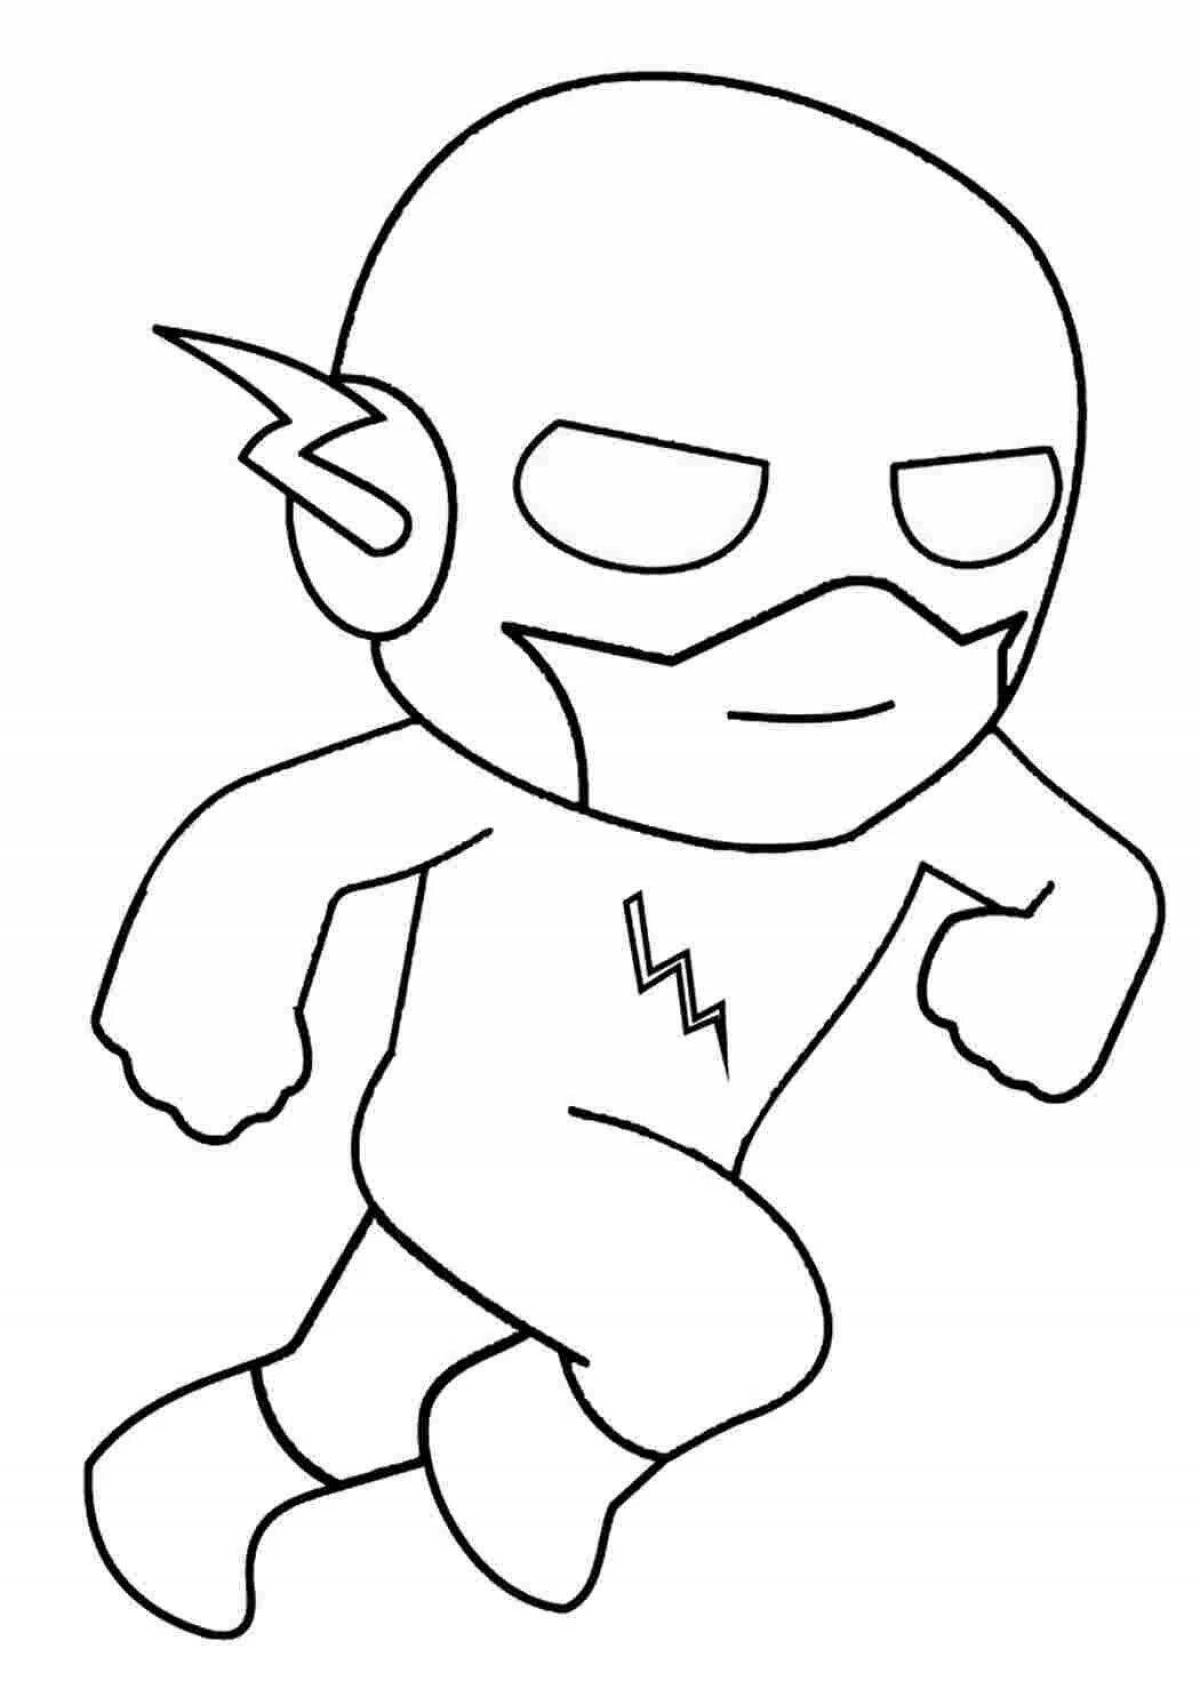 Amazing little superheroes coloring pages